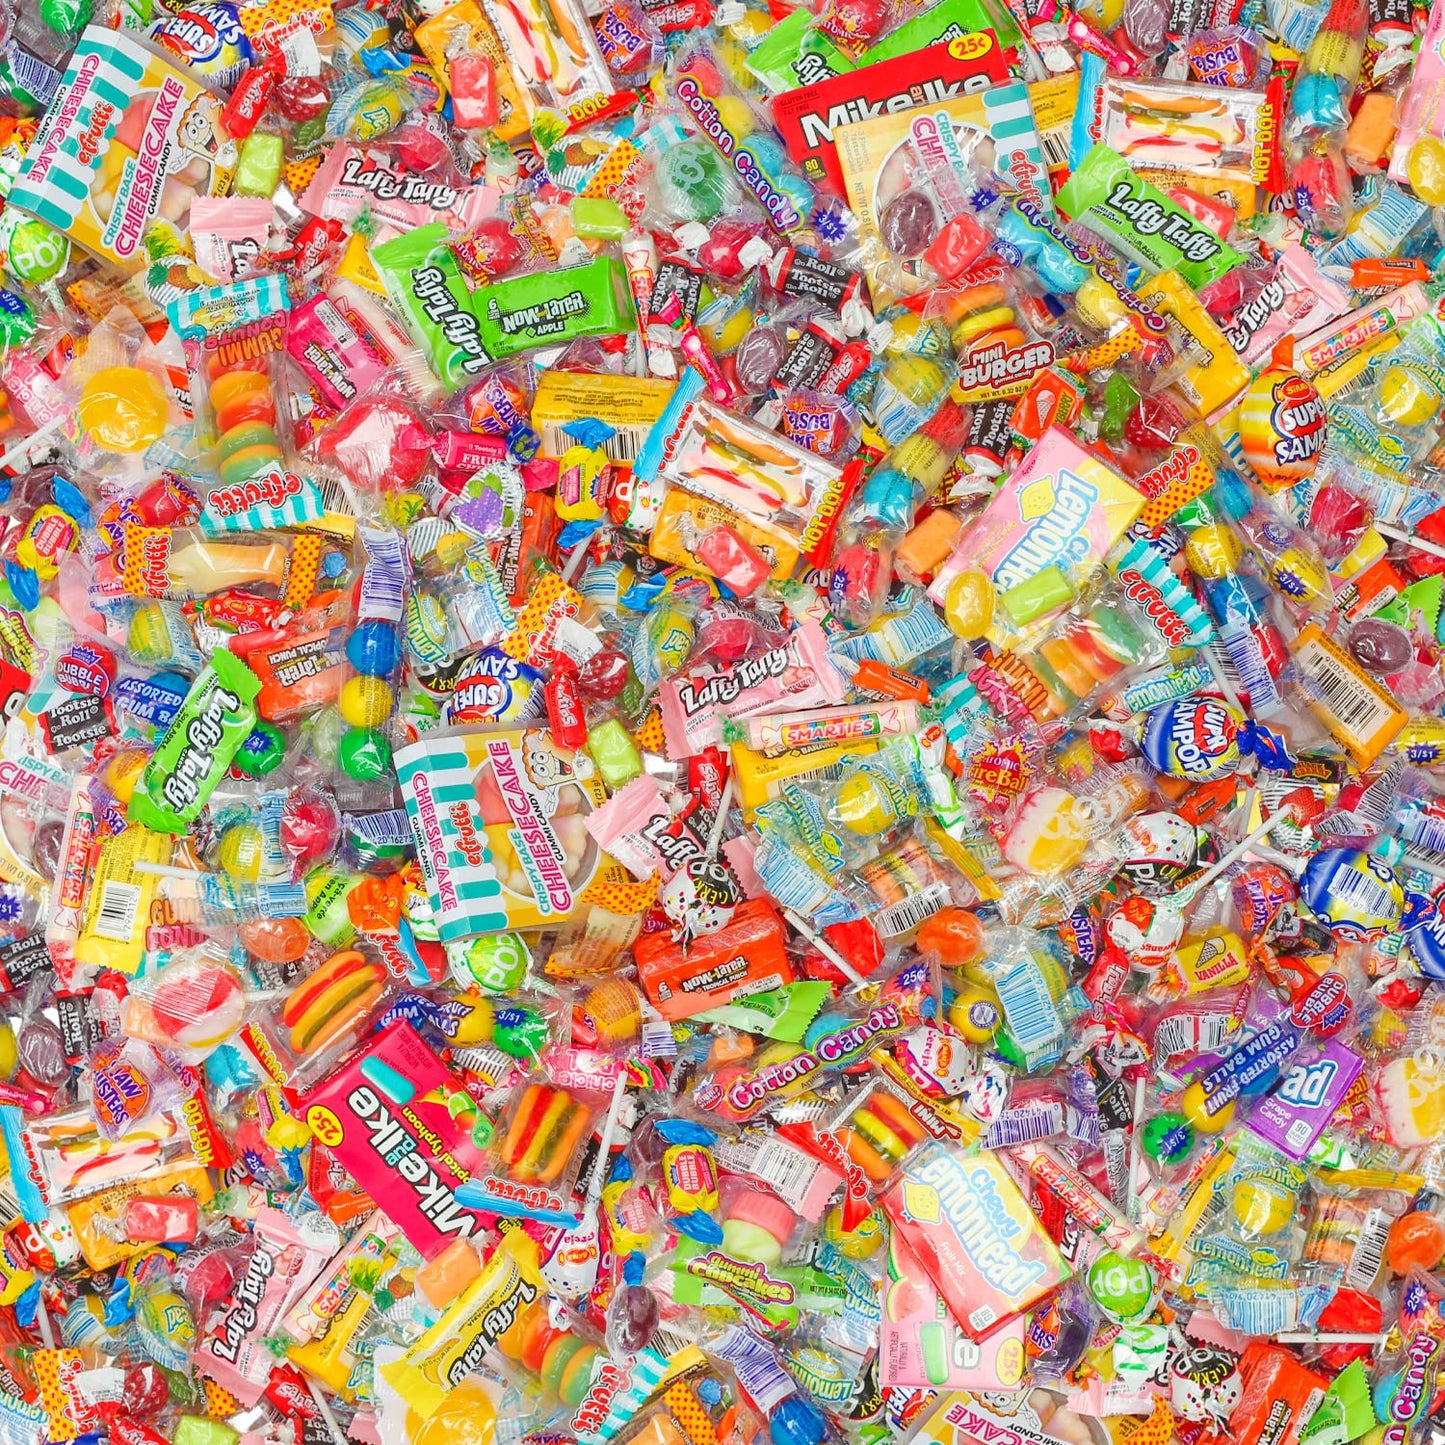 Party Mix - 3 Pounds - Party Candy - Bulk Candies - Individually Wrapped Candies - Assorted Candy